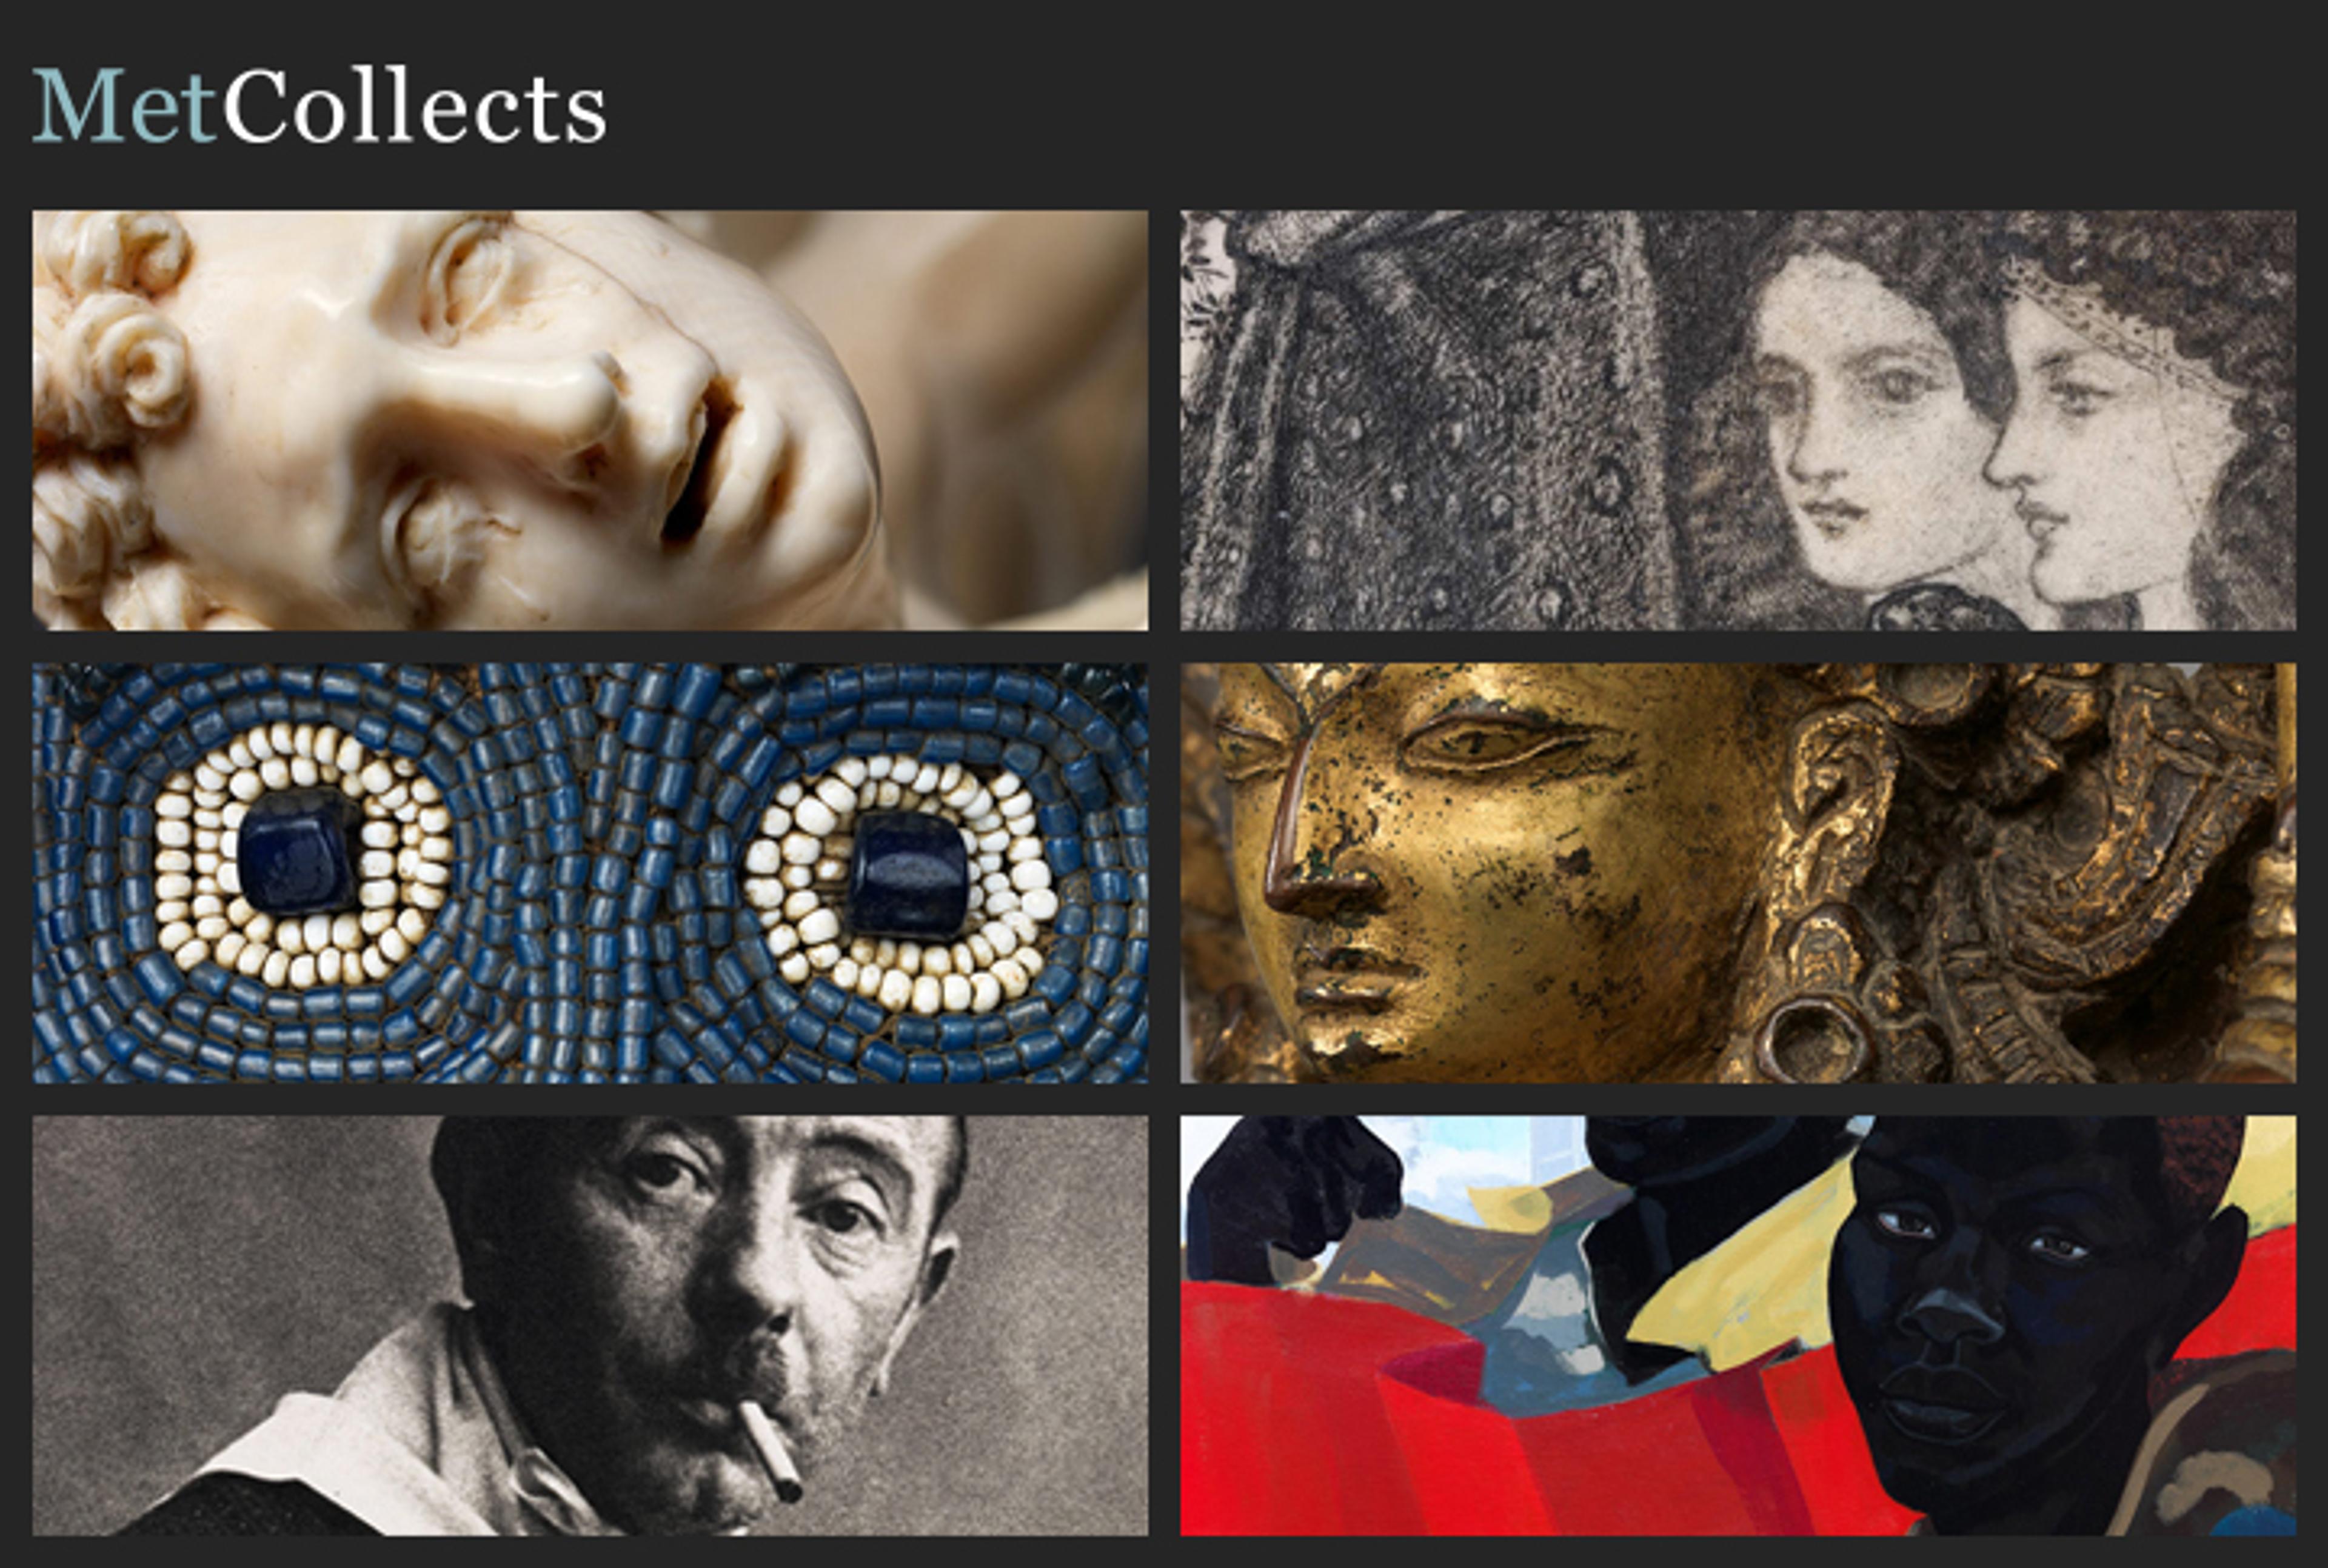 Grid of six images of new acquisitions featured in MetCollects